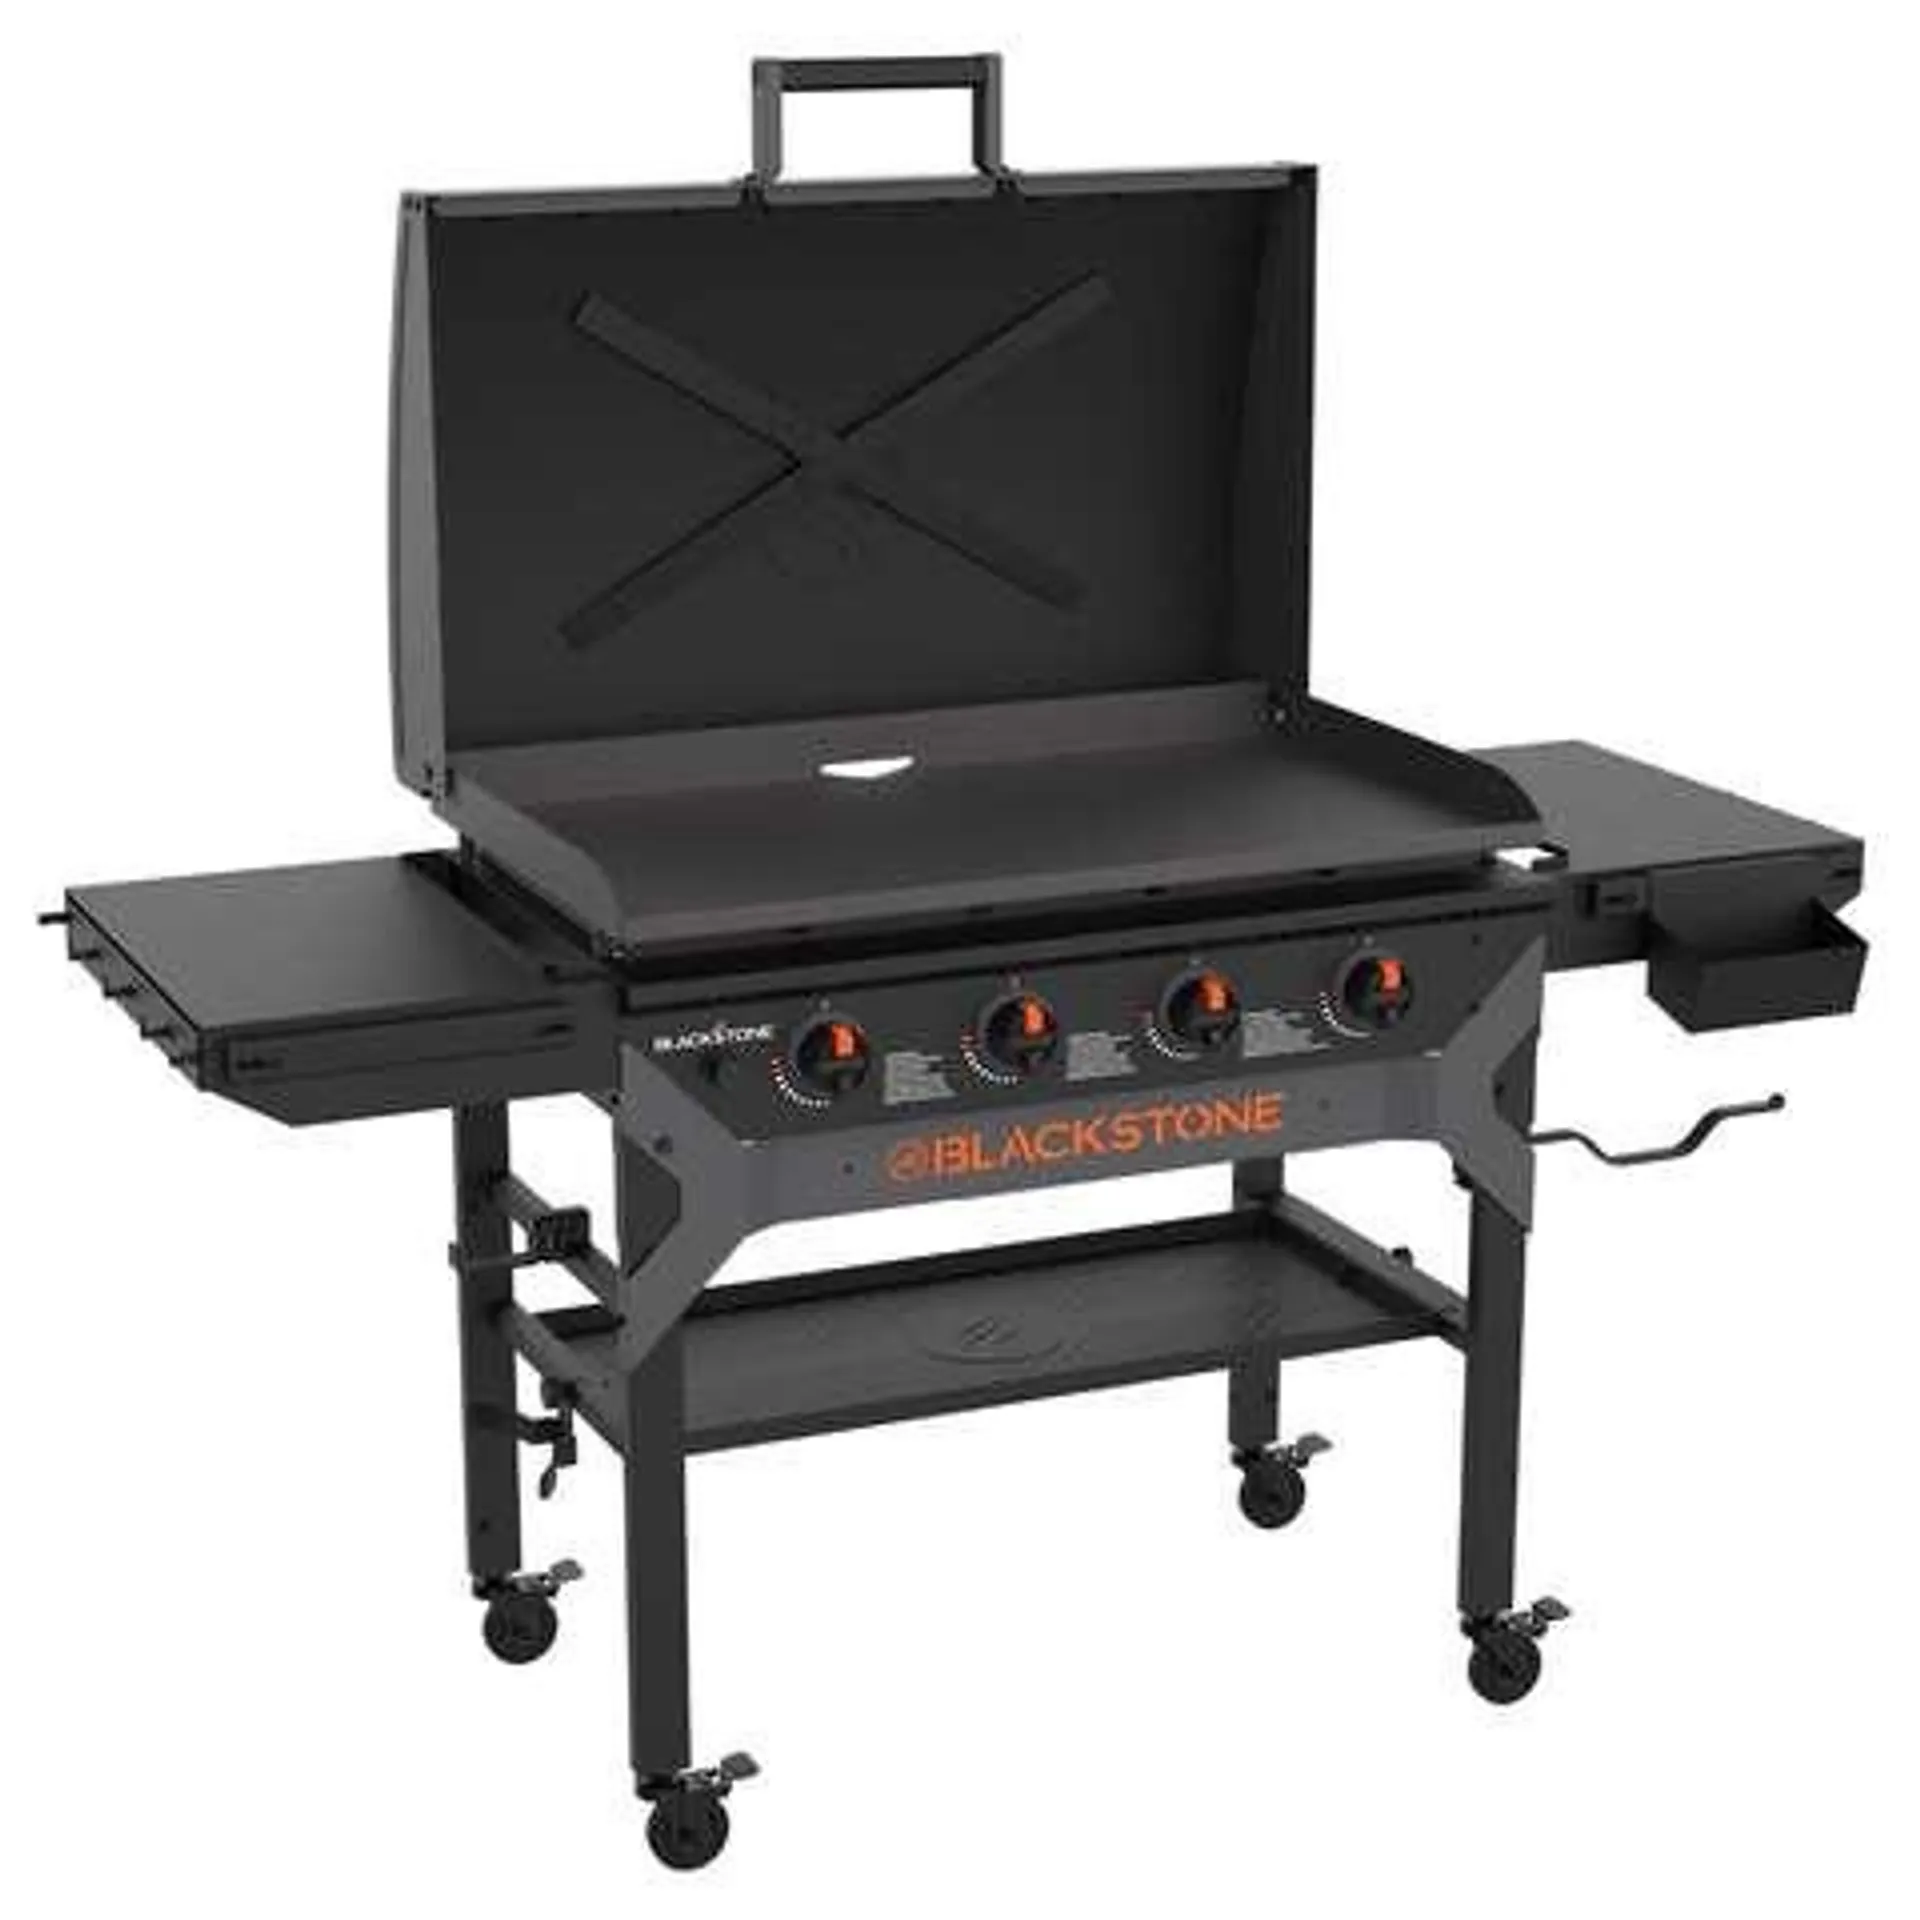 Blackstone Iron Forged 4 Burner Liquid Propane Outdoor Griddle with Hood Black